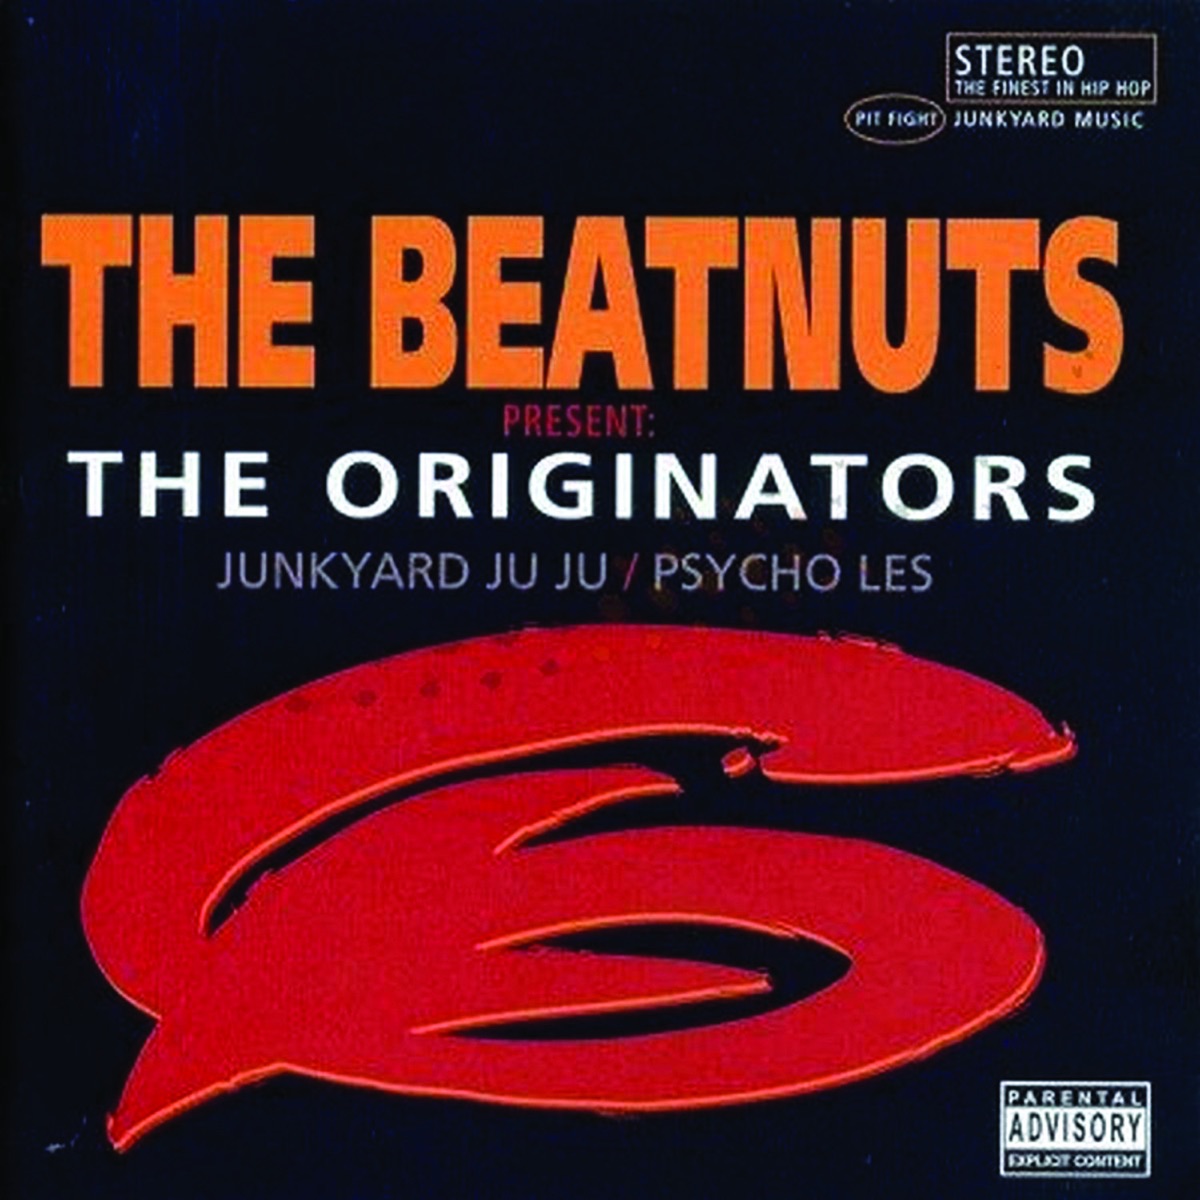 Intoxicated Demons - The EP - Album by The Beatnuts - Apple Music